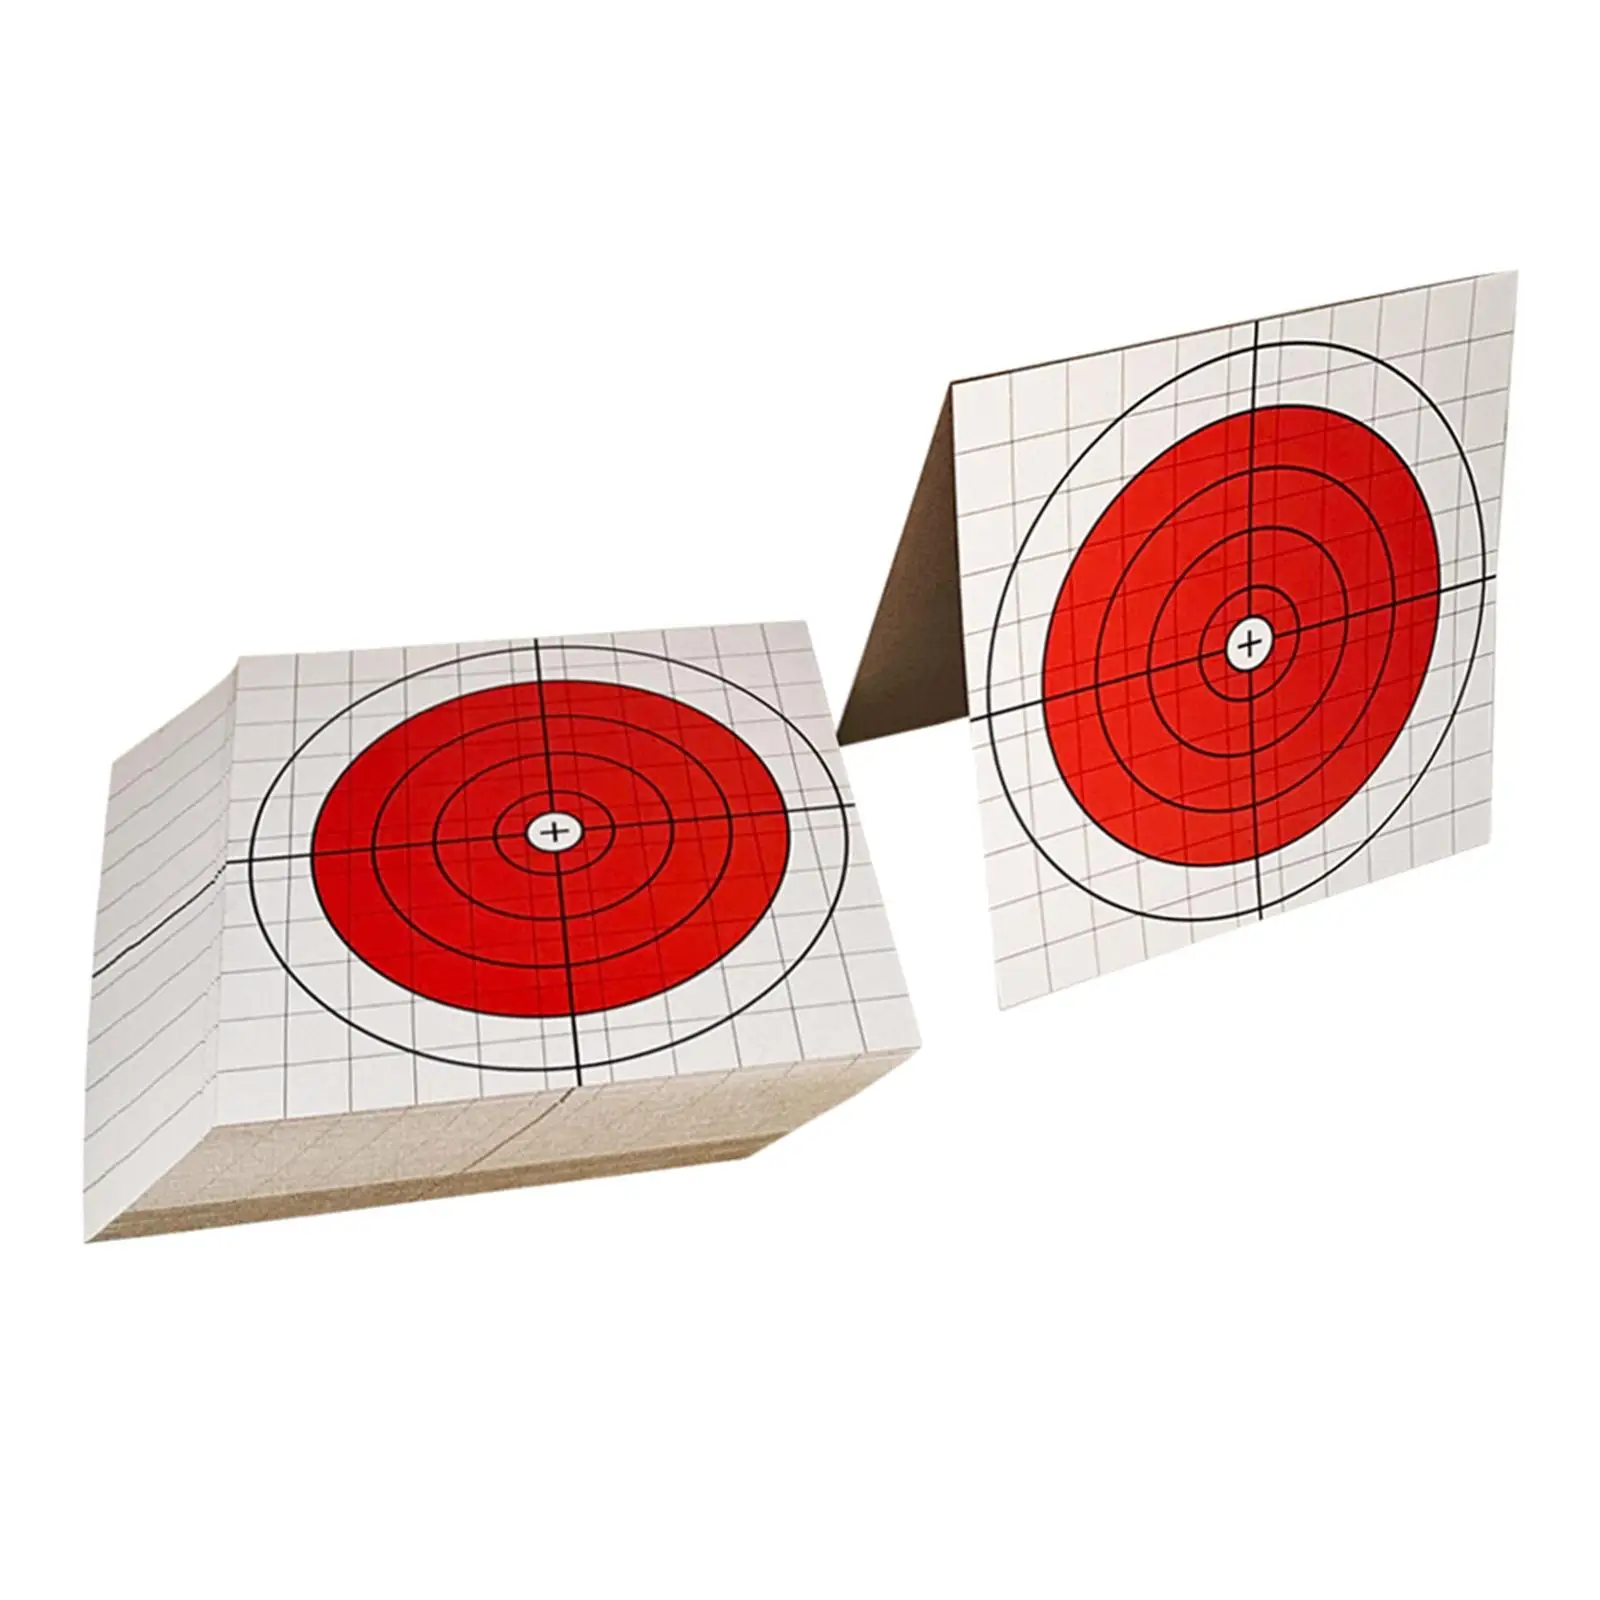 100 Pieces Coated Paper Shooting Aim Targets 14x14cm Markers for  Bow